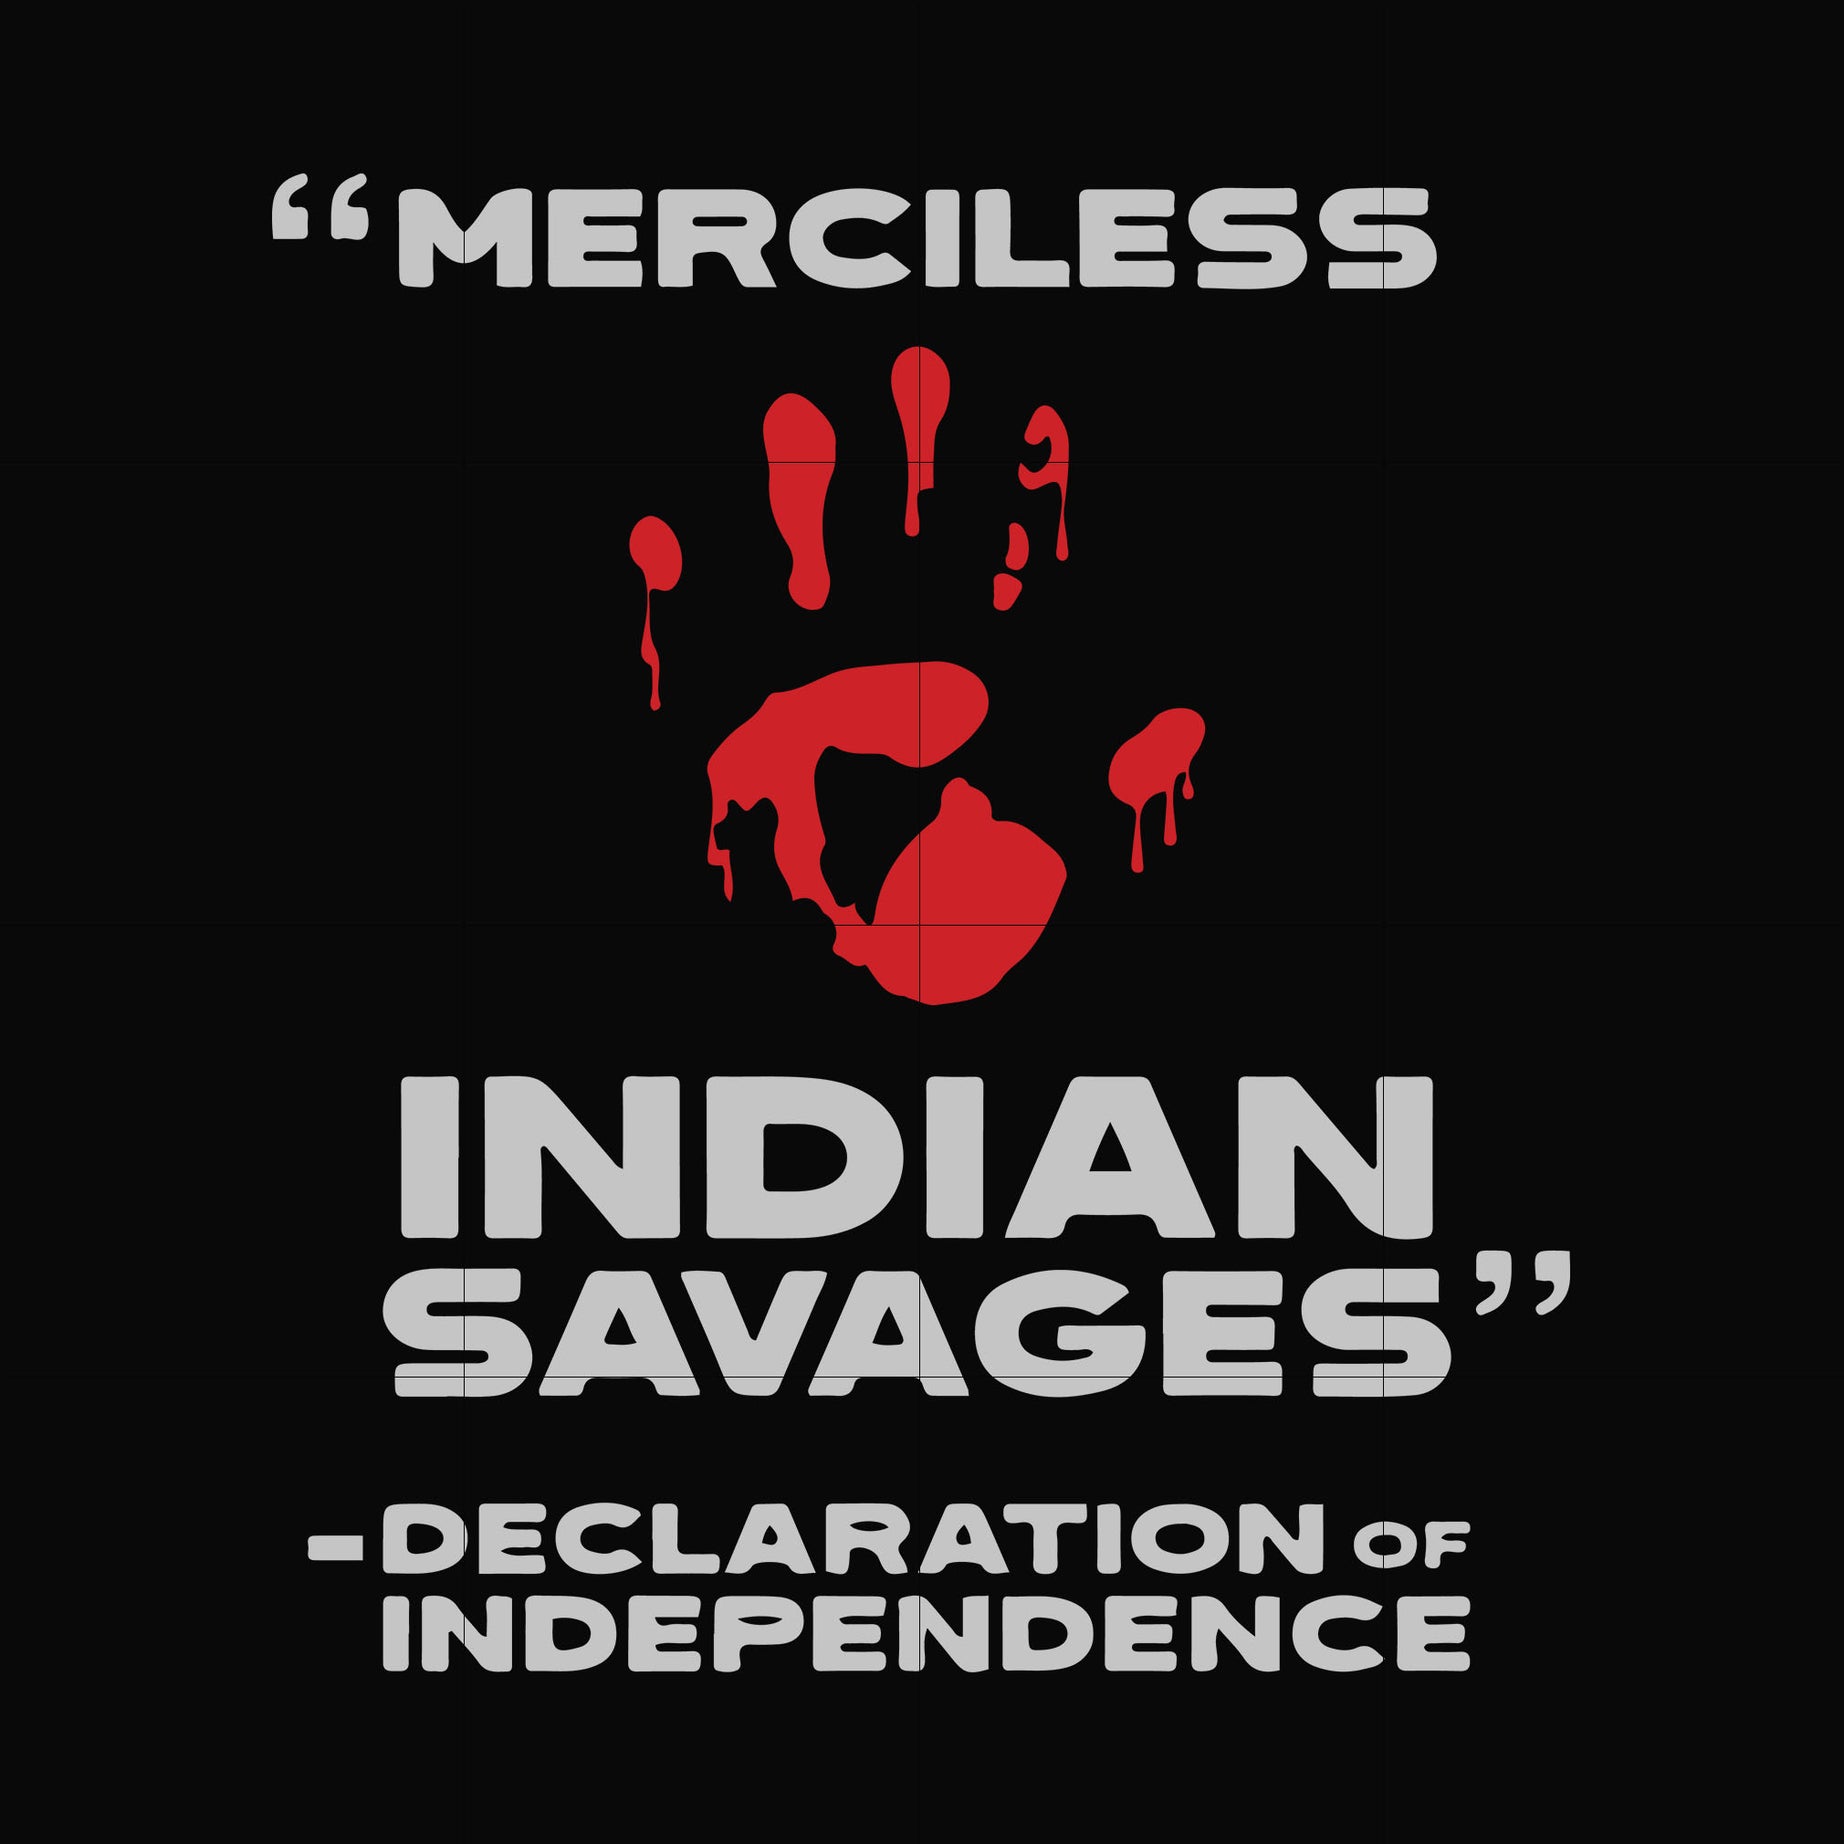 Merciless indian savages declaration of independence svg, png, dxf, eps file FN000904